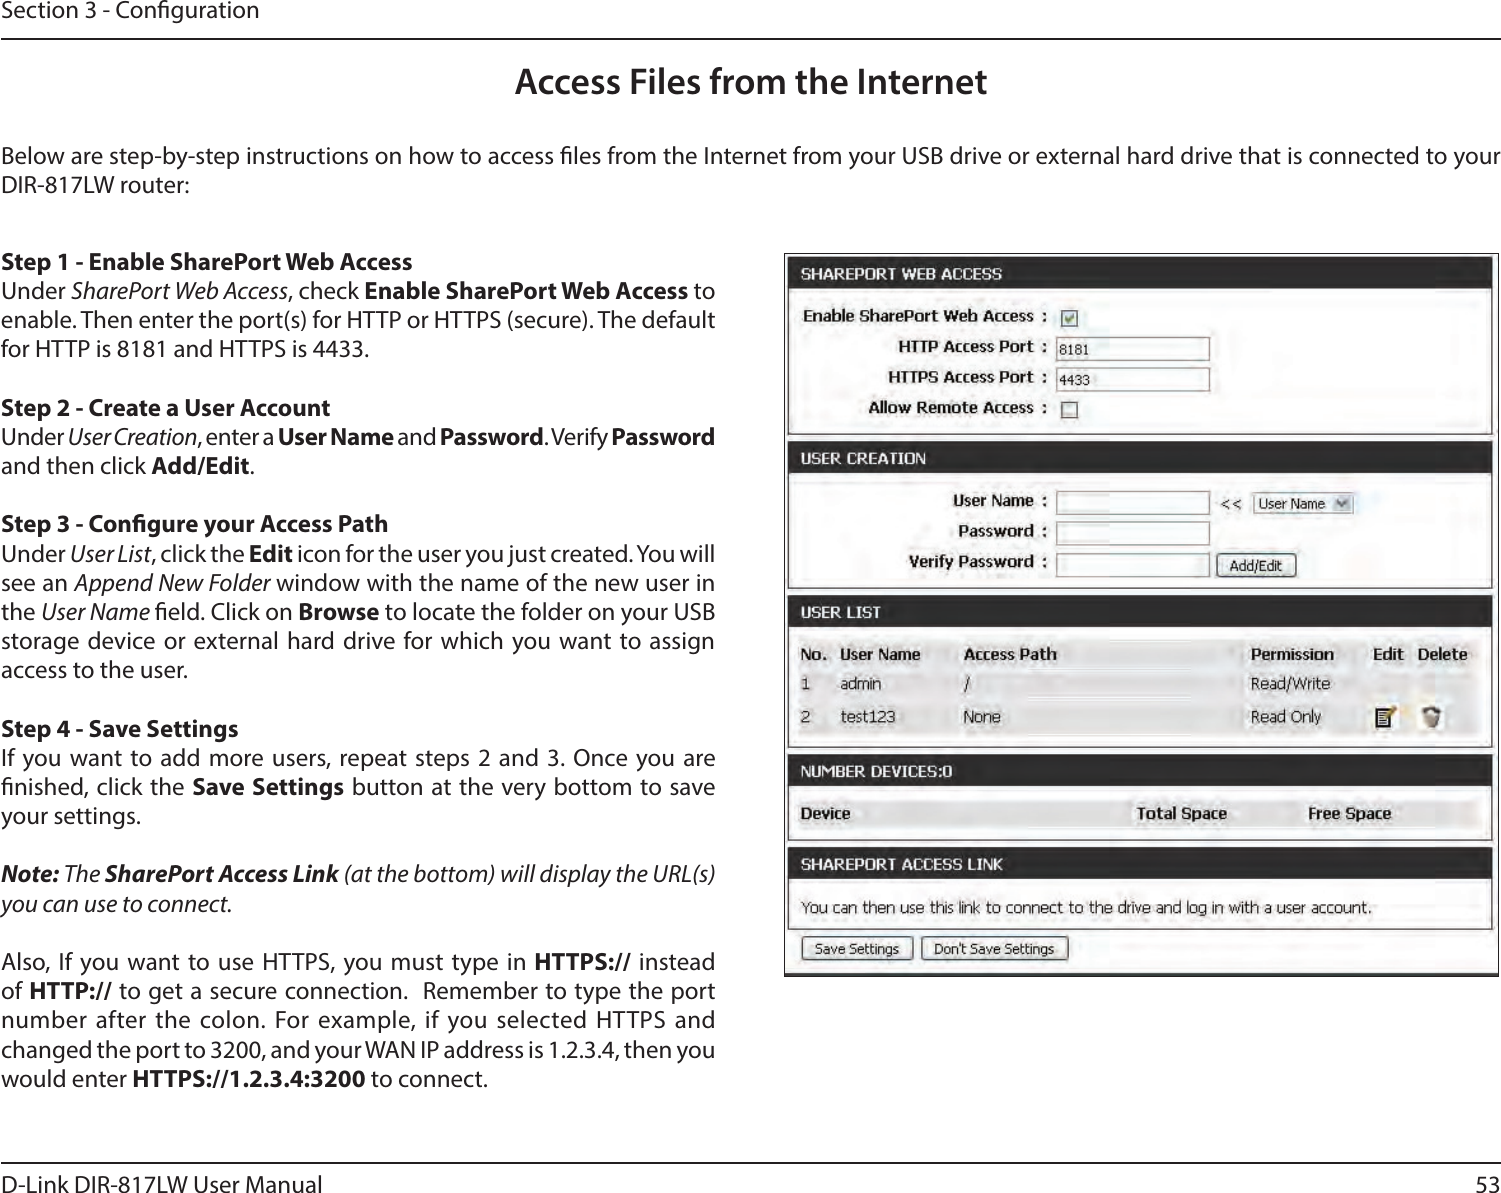 53D-Link DIR-817LW User ManualSection 3 - CongurationAccess Files from the InternetBelow are step-by-step instructions on how to access les from the Internet from your USB drive or external hard drive that is connected to your DIR-817LW router:Step 1 - Enable SharePort Web AccessUnder SharePort Web Access, check Enable SharePort Web Access to enable. Then enter the port(s) for HTTP or HTTPS (secure). The default for HTTP is 8181 and HTTPS is 4433.Step 2 - Create a User AccountUnder User Creation, enter a User Name and Password. Verify Password and then click Add/Edit. Step 3 - Congure your Access PathUnder User List, click the Edit icon for the user you just created. You will see an Append New Folder window with the name of the new user in the User Name eld. Click on Browse to locate the folder on your USB storage device or external hard drive for which you want  to  assign access to the user. Step 4 - Save Settings If you want to add more users, repeat steps 2 and 3. Once  you are nished, click the Save Settings button at the very bottom to save your settings. Note: The SharePort Access Link (at the bottom) will display the URL(s) you can use to connect. Also,  If you want to use HTTPS, you must  type in HTTPS:// instead of HTTP:// to get a secure connection.  Remember to type the port number after the colon. For  example, if you selected HTTPS and changed the port to 3200, and your WAN IP address is 1.2.3.4, then you would enter HTTPS://1.2.3.4:3200 to connect.